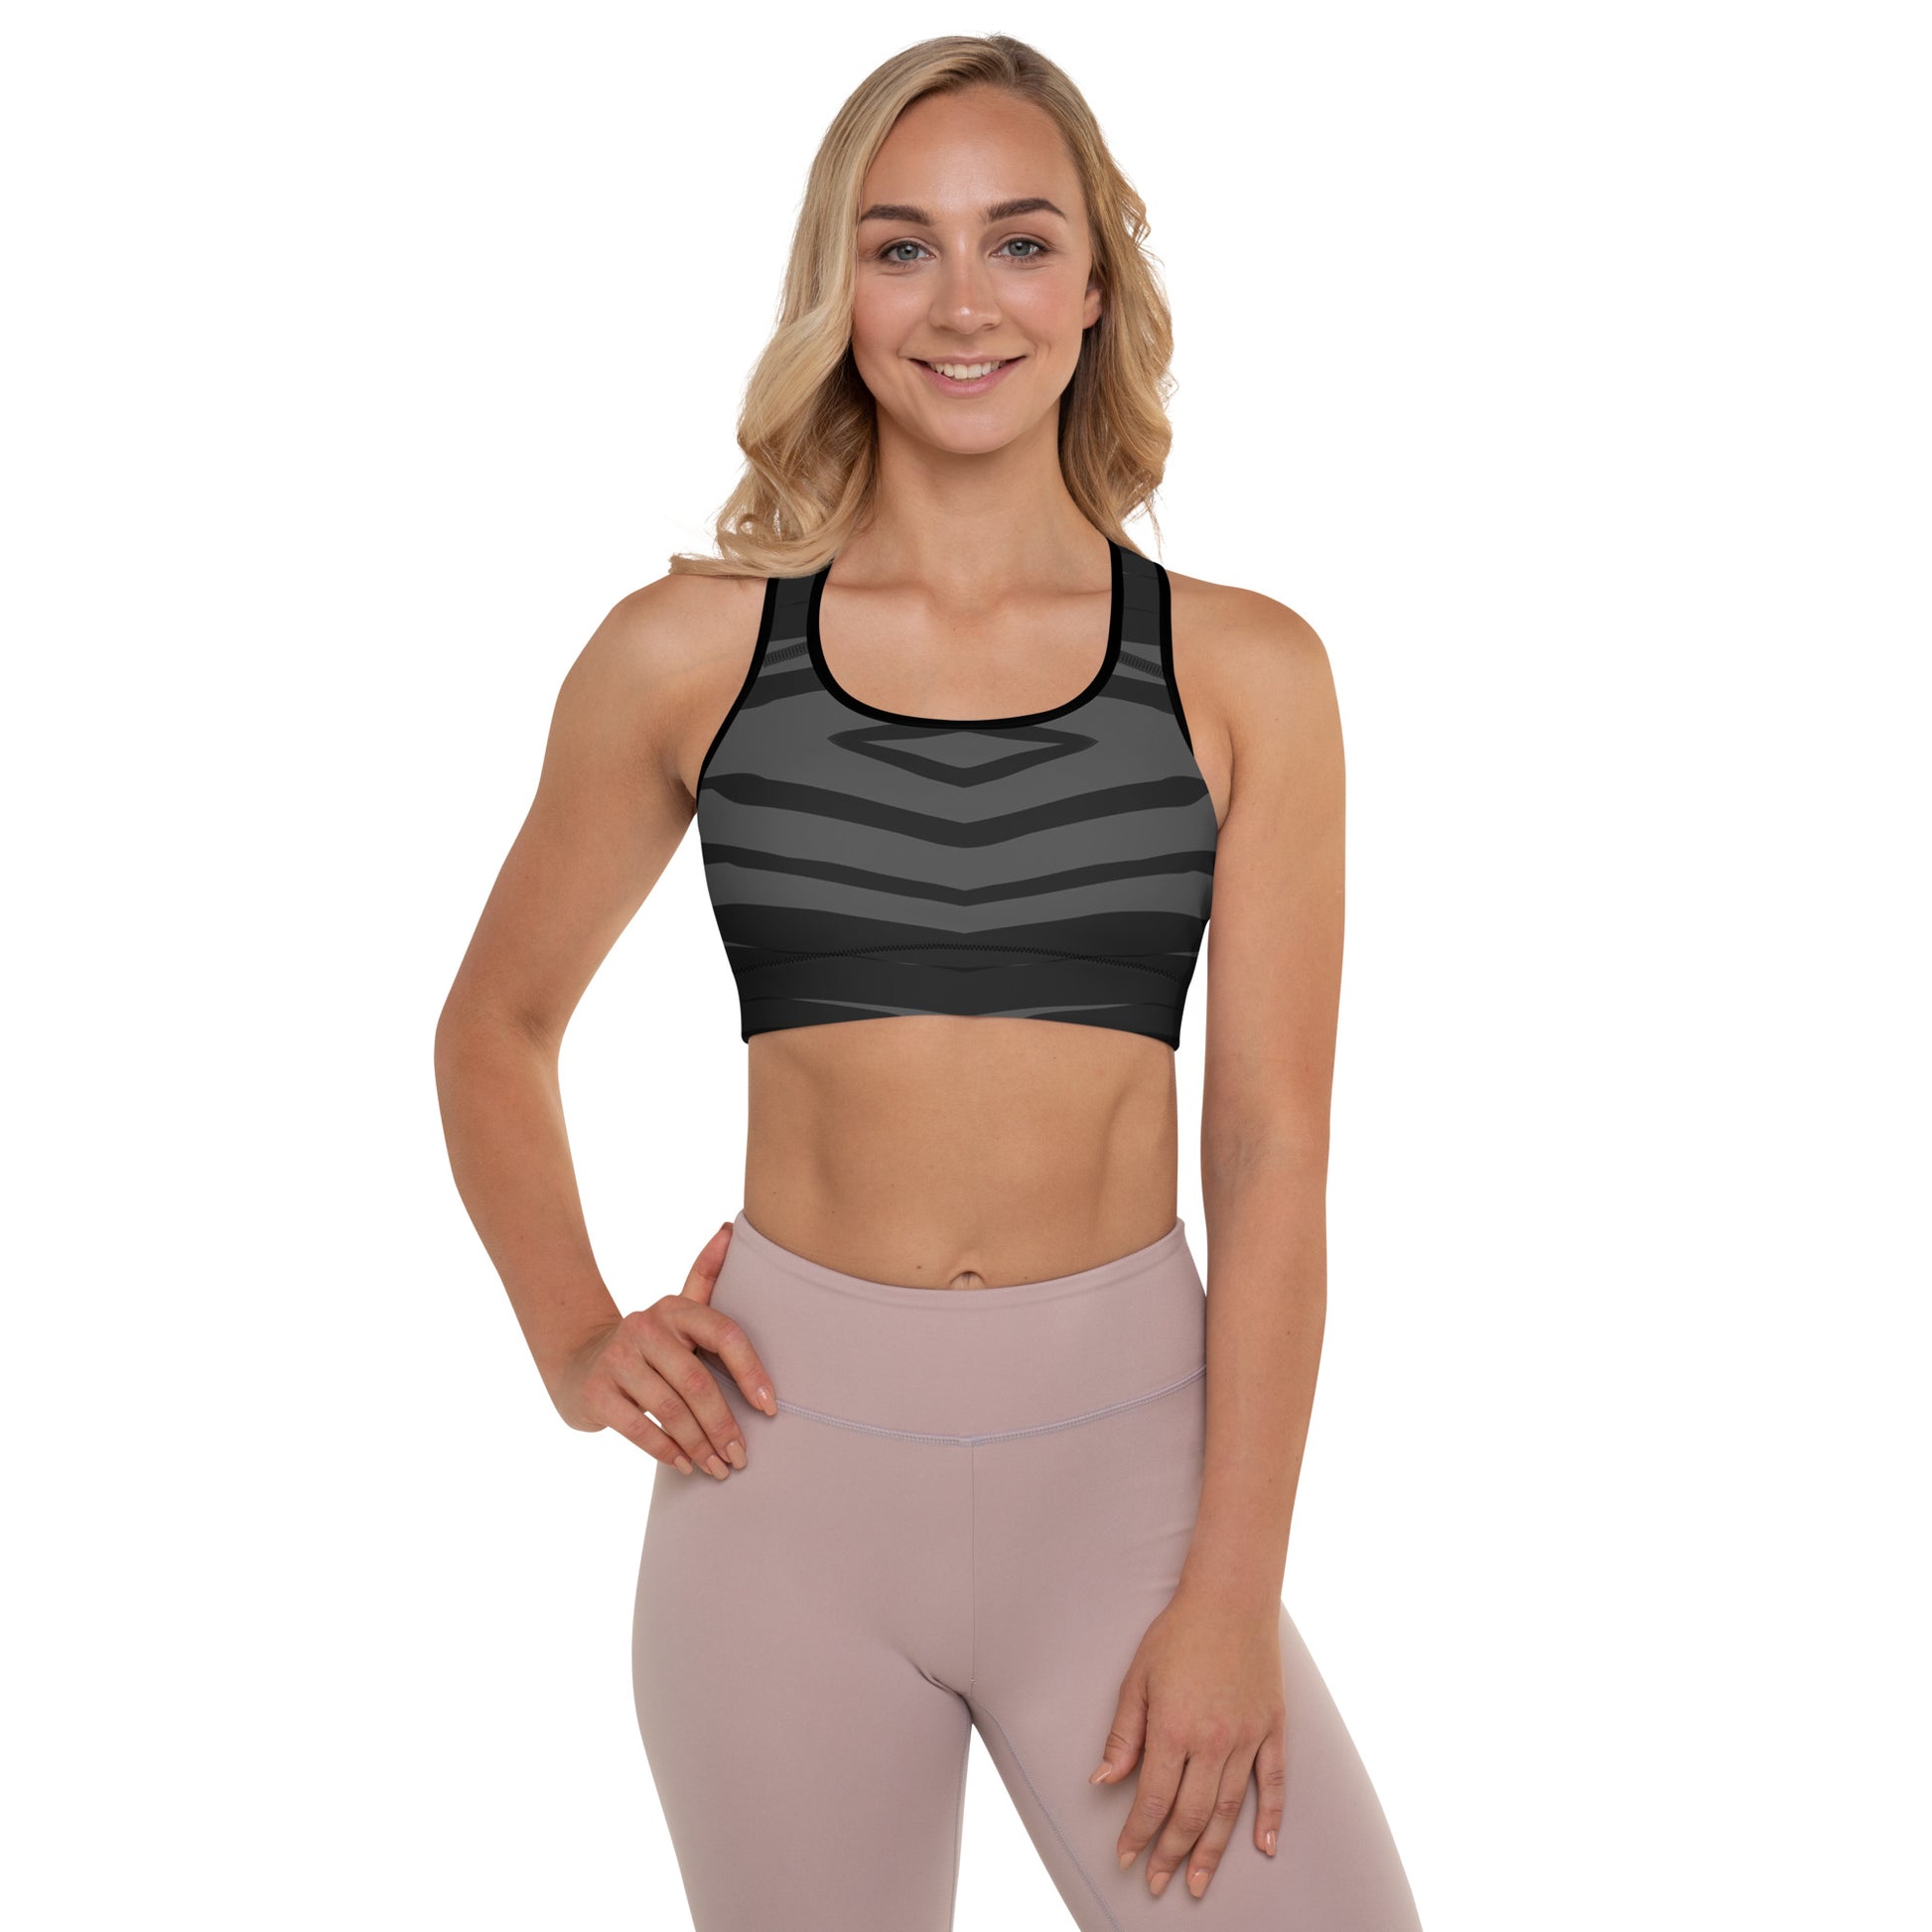 Introducing the Black H Stripes Rombo BeSculpt Women Padded Sports Bra—a chic and supportive addition to your activewear collection!